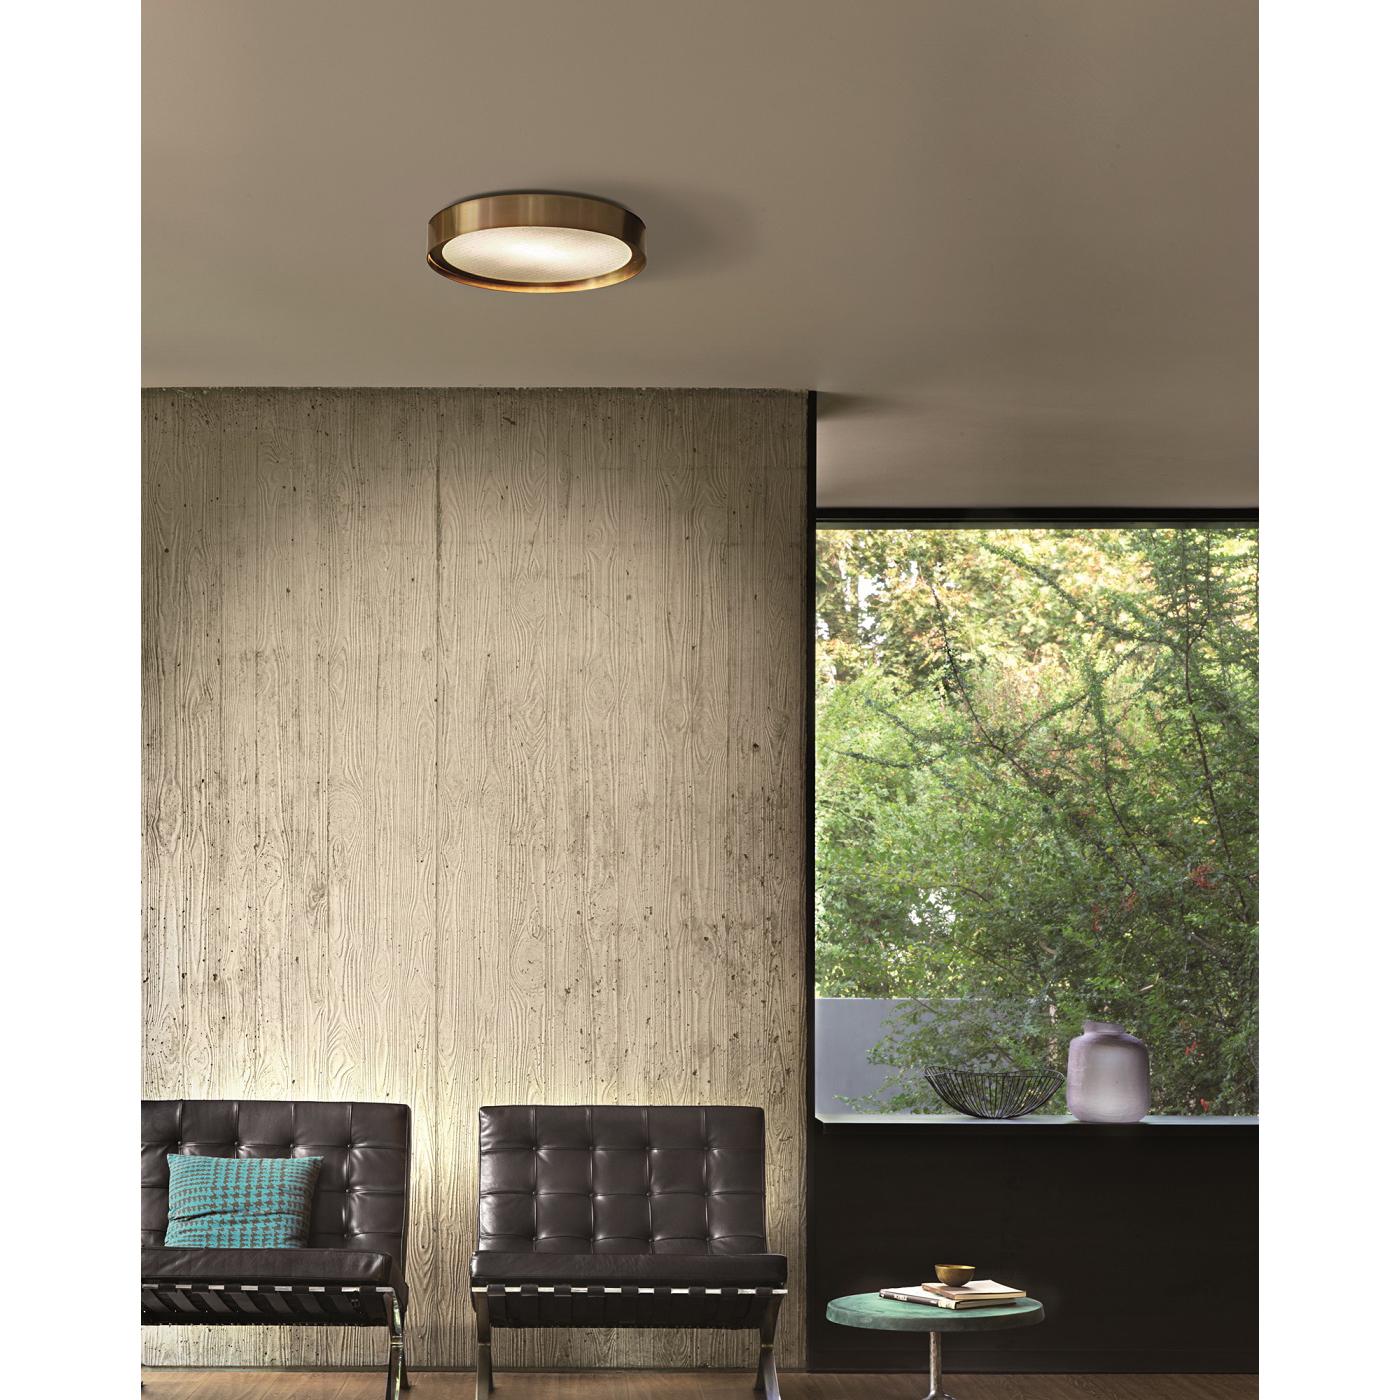 Ceiling and wall lamp 'Berlin' designed by Christophe Pillet in 2017.
Adjustable wall lamp giving indirect led light in metal. Manufactured by Oluce, Italy.

Christophe Pillet designed Berlin, an object that calls into question the common